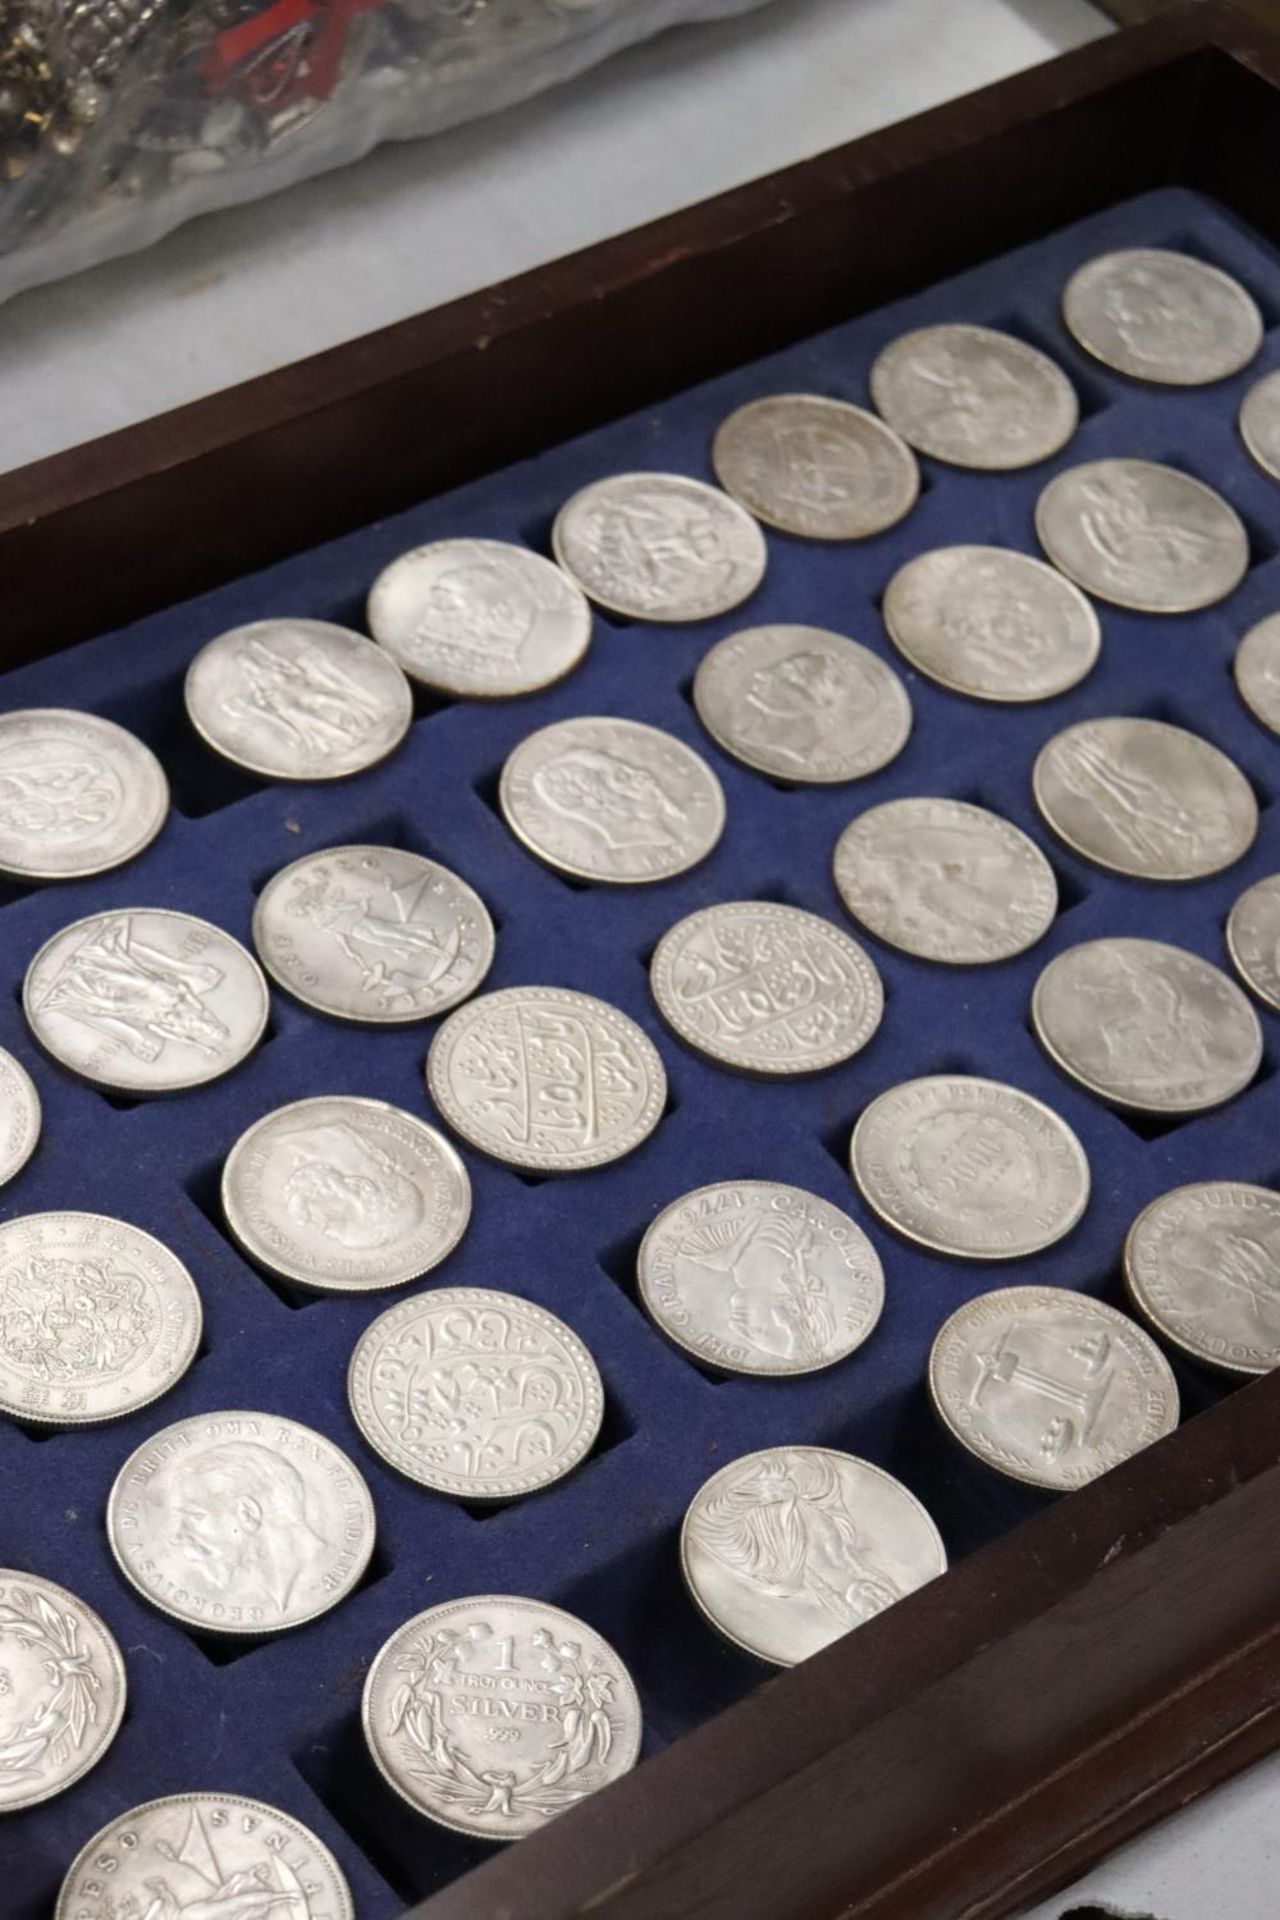 FORTY FOUR VARIOUS VINTAGE TOKENS/COINS IN A WOODEN BOX - Image 4 of 6